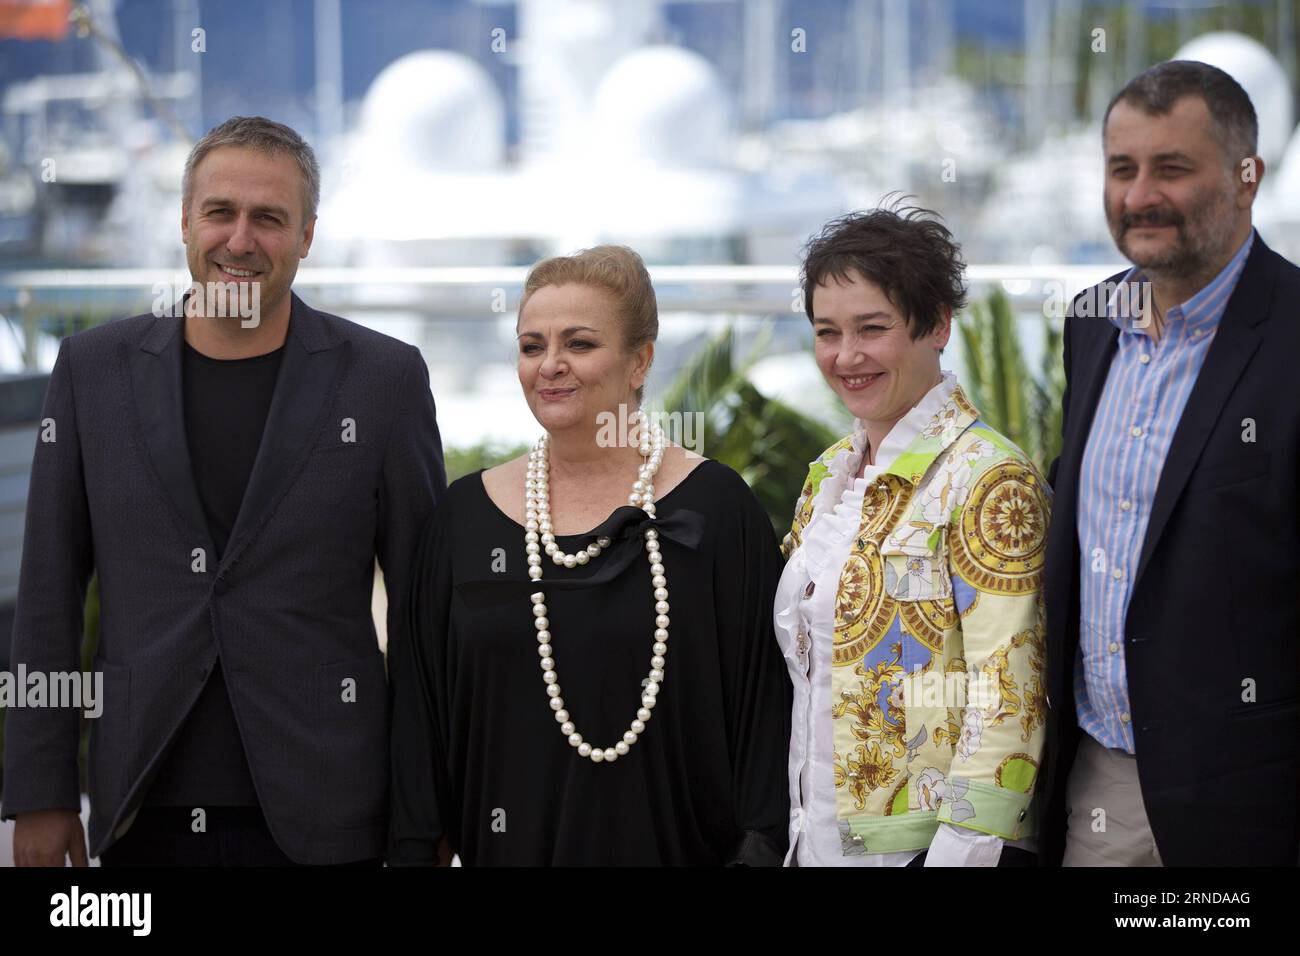 69. Festival de Cannes - Sieranevada Photocall (160512) -- CANNES, May 12, 2016 -- Cast members Mimi Branescu, Dana Dogaru, producer Anca Puiu and director Cristi Puiu(from L to R) pose during a photocall for the film Sieranevada in competition during the 69th Cannes Film Festival in Cannes, France, May 12, 2016. ) FRANCE-CANNES-FILM FESTIVAL-SIERANEVADA-PHOTOCALL JinxYu PUBLICATIONxNOTxINxCHN   69 Festival de Cannes  photo call 160512 Cannes May 12 2016 Cast Members Mimi  Dana  Producer Anca Puiu and Director Cristi Puiu from l to r Pose during a photo call for The Film  in Competition during Stock Photo